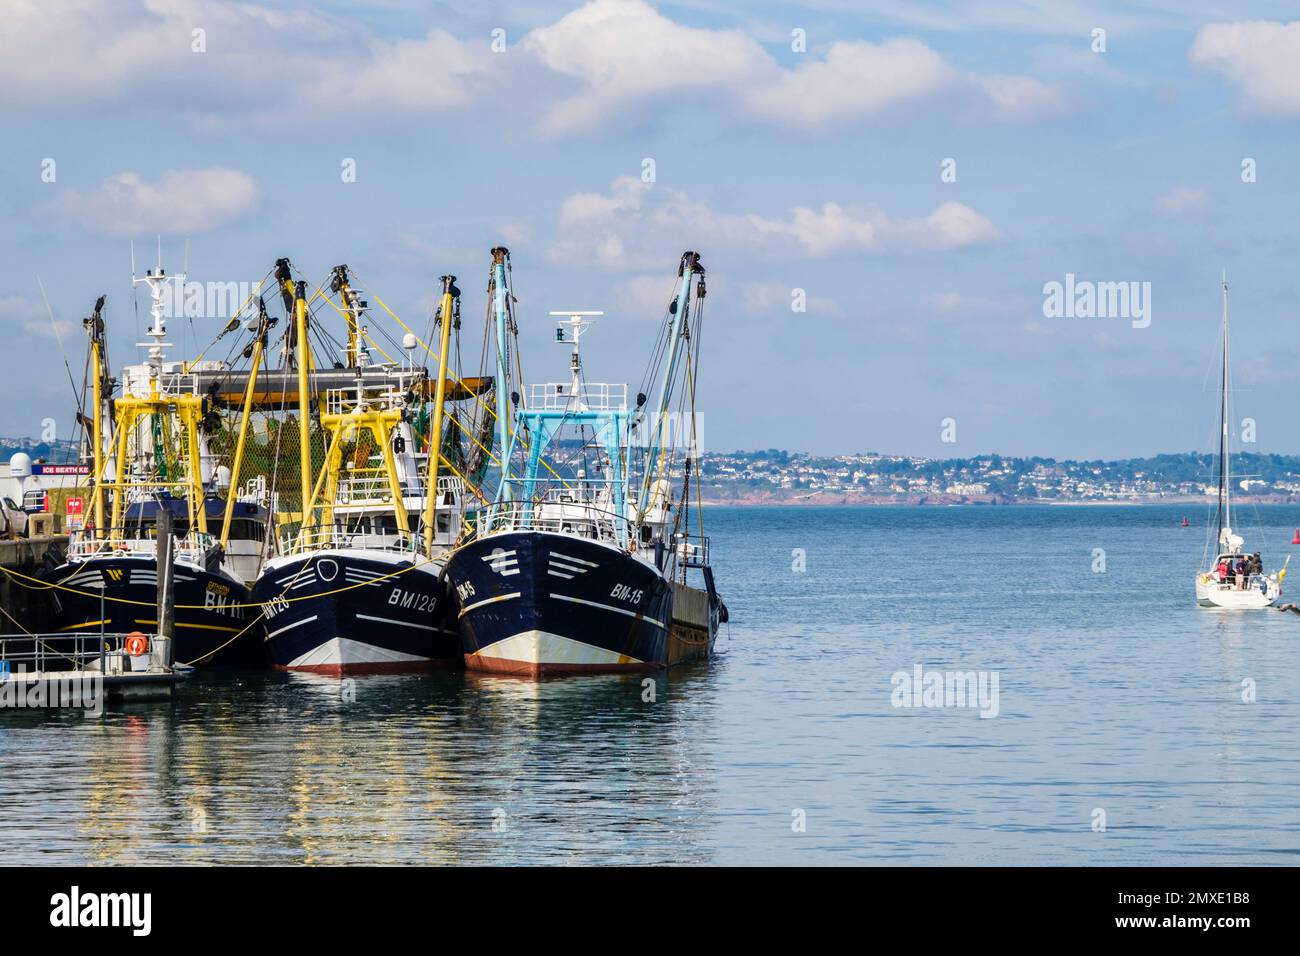 Commercial fishing trawlers in port in the outer harbour. Brixham, Devon, England, UK, Britain Stock Photo